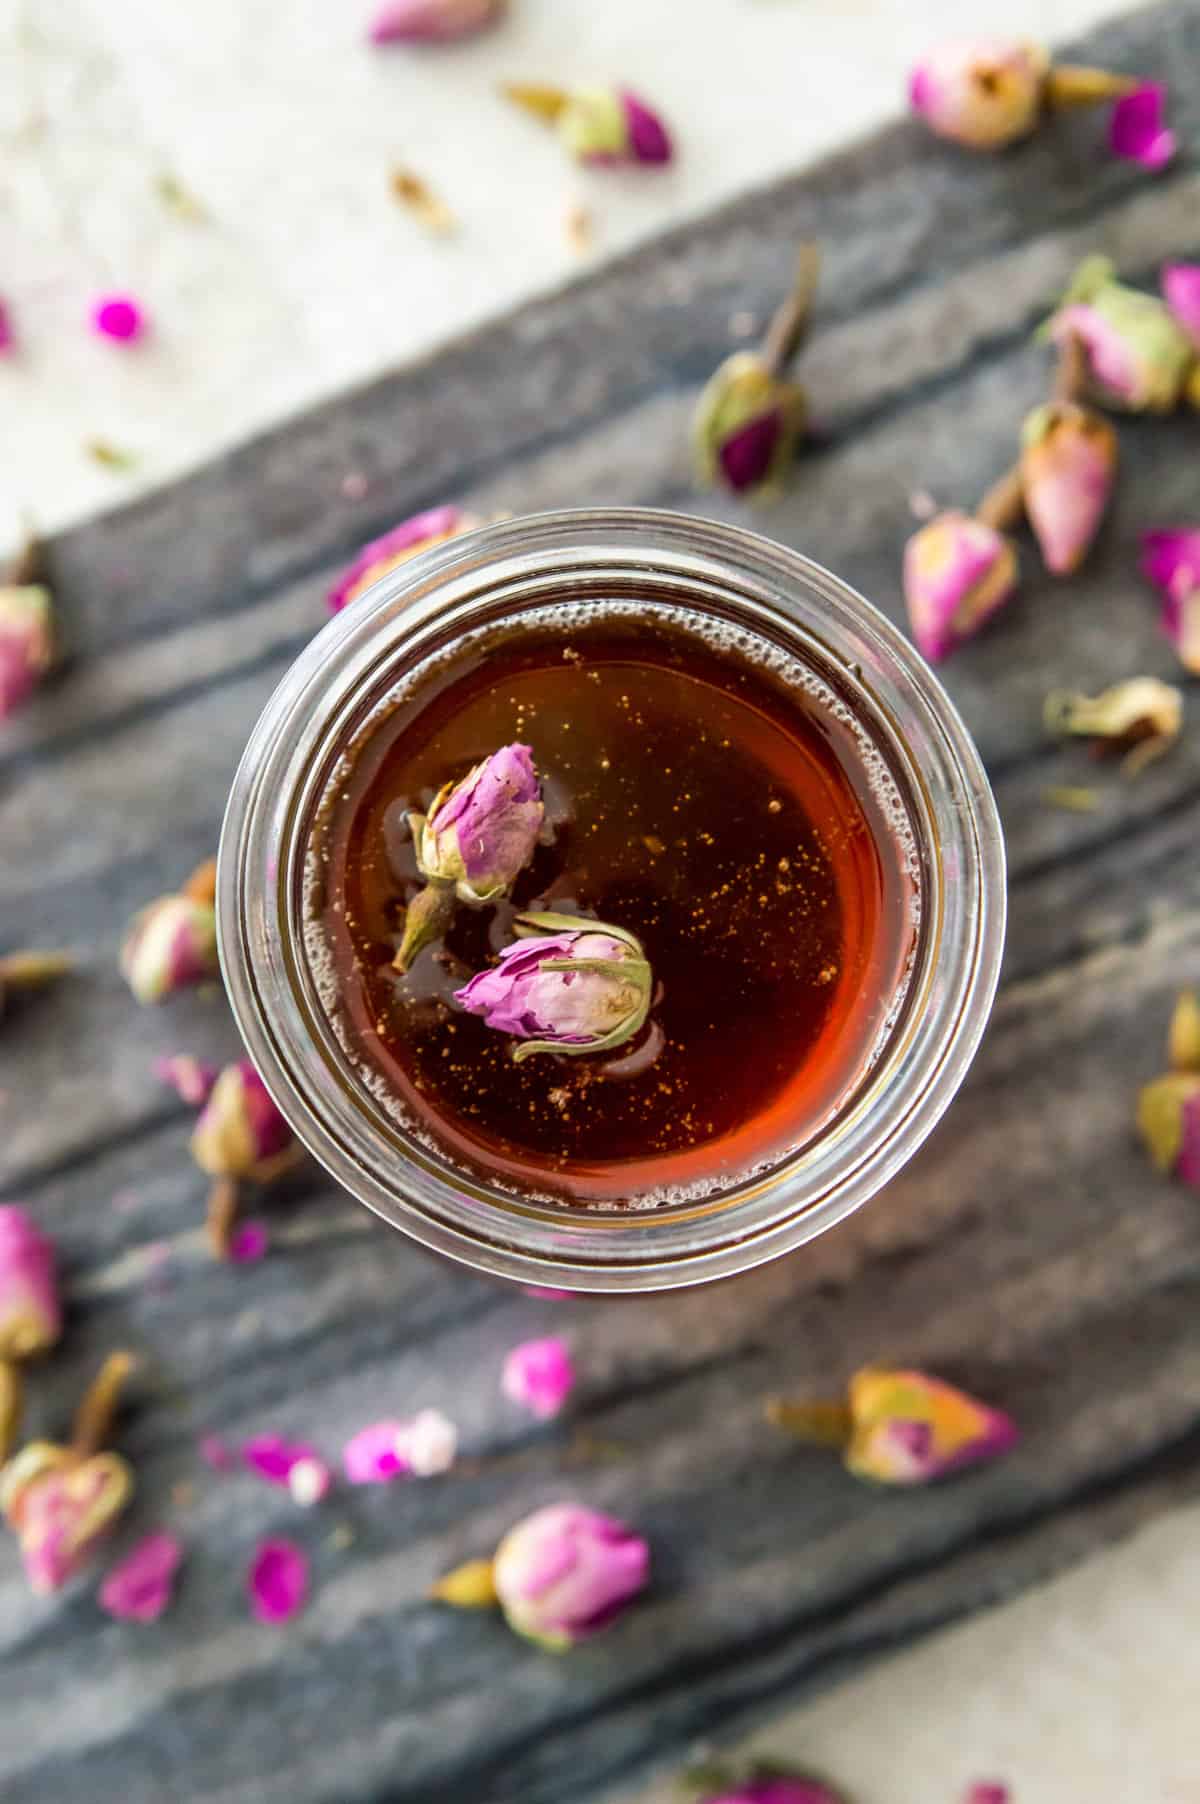 A glass jar filled with a sugar syrup and topped with two dried rose petals.